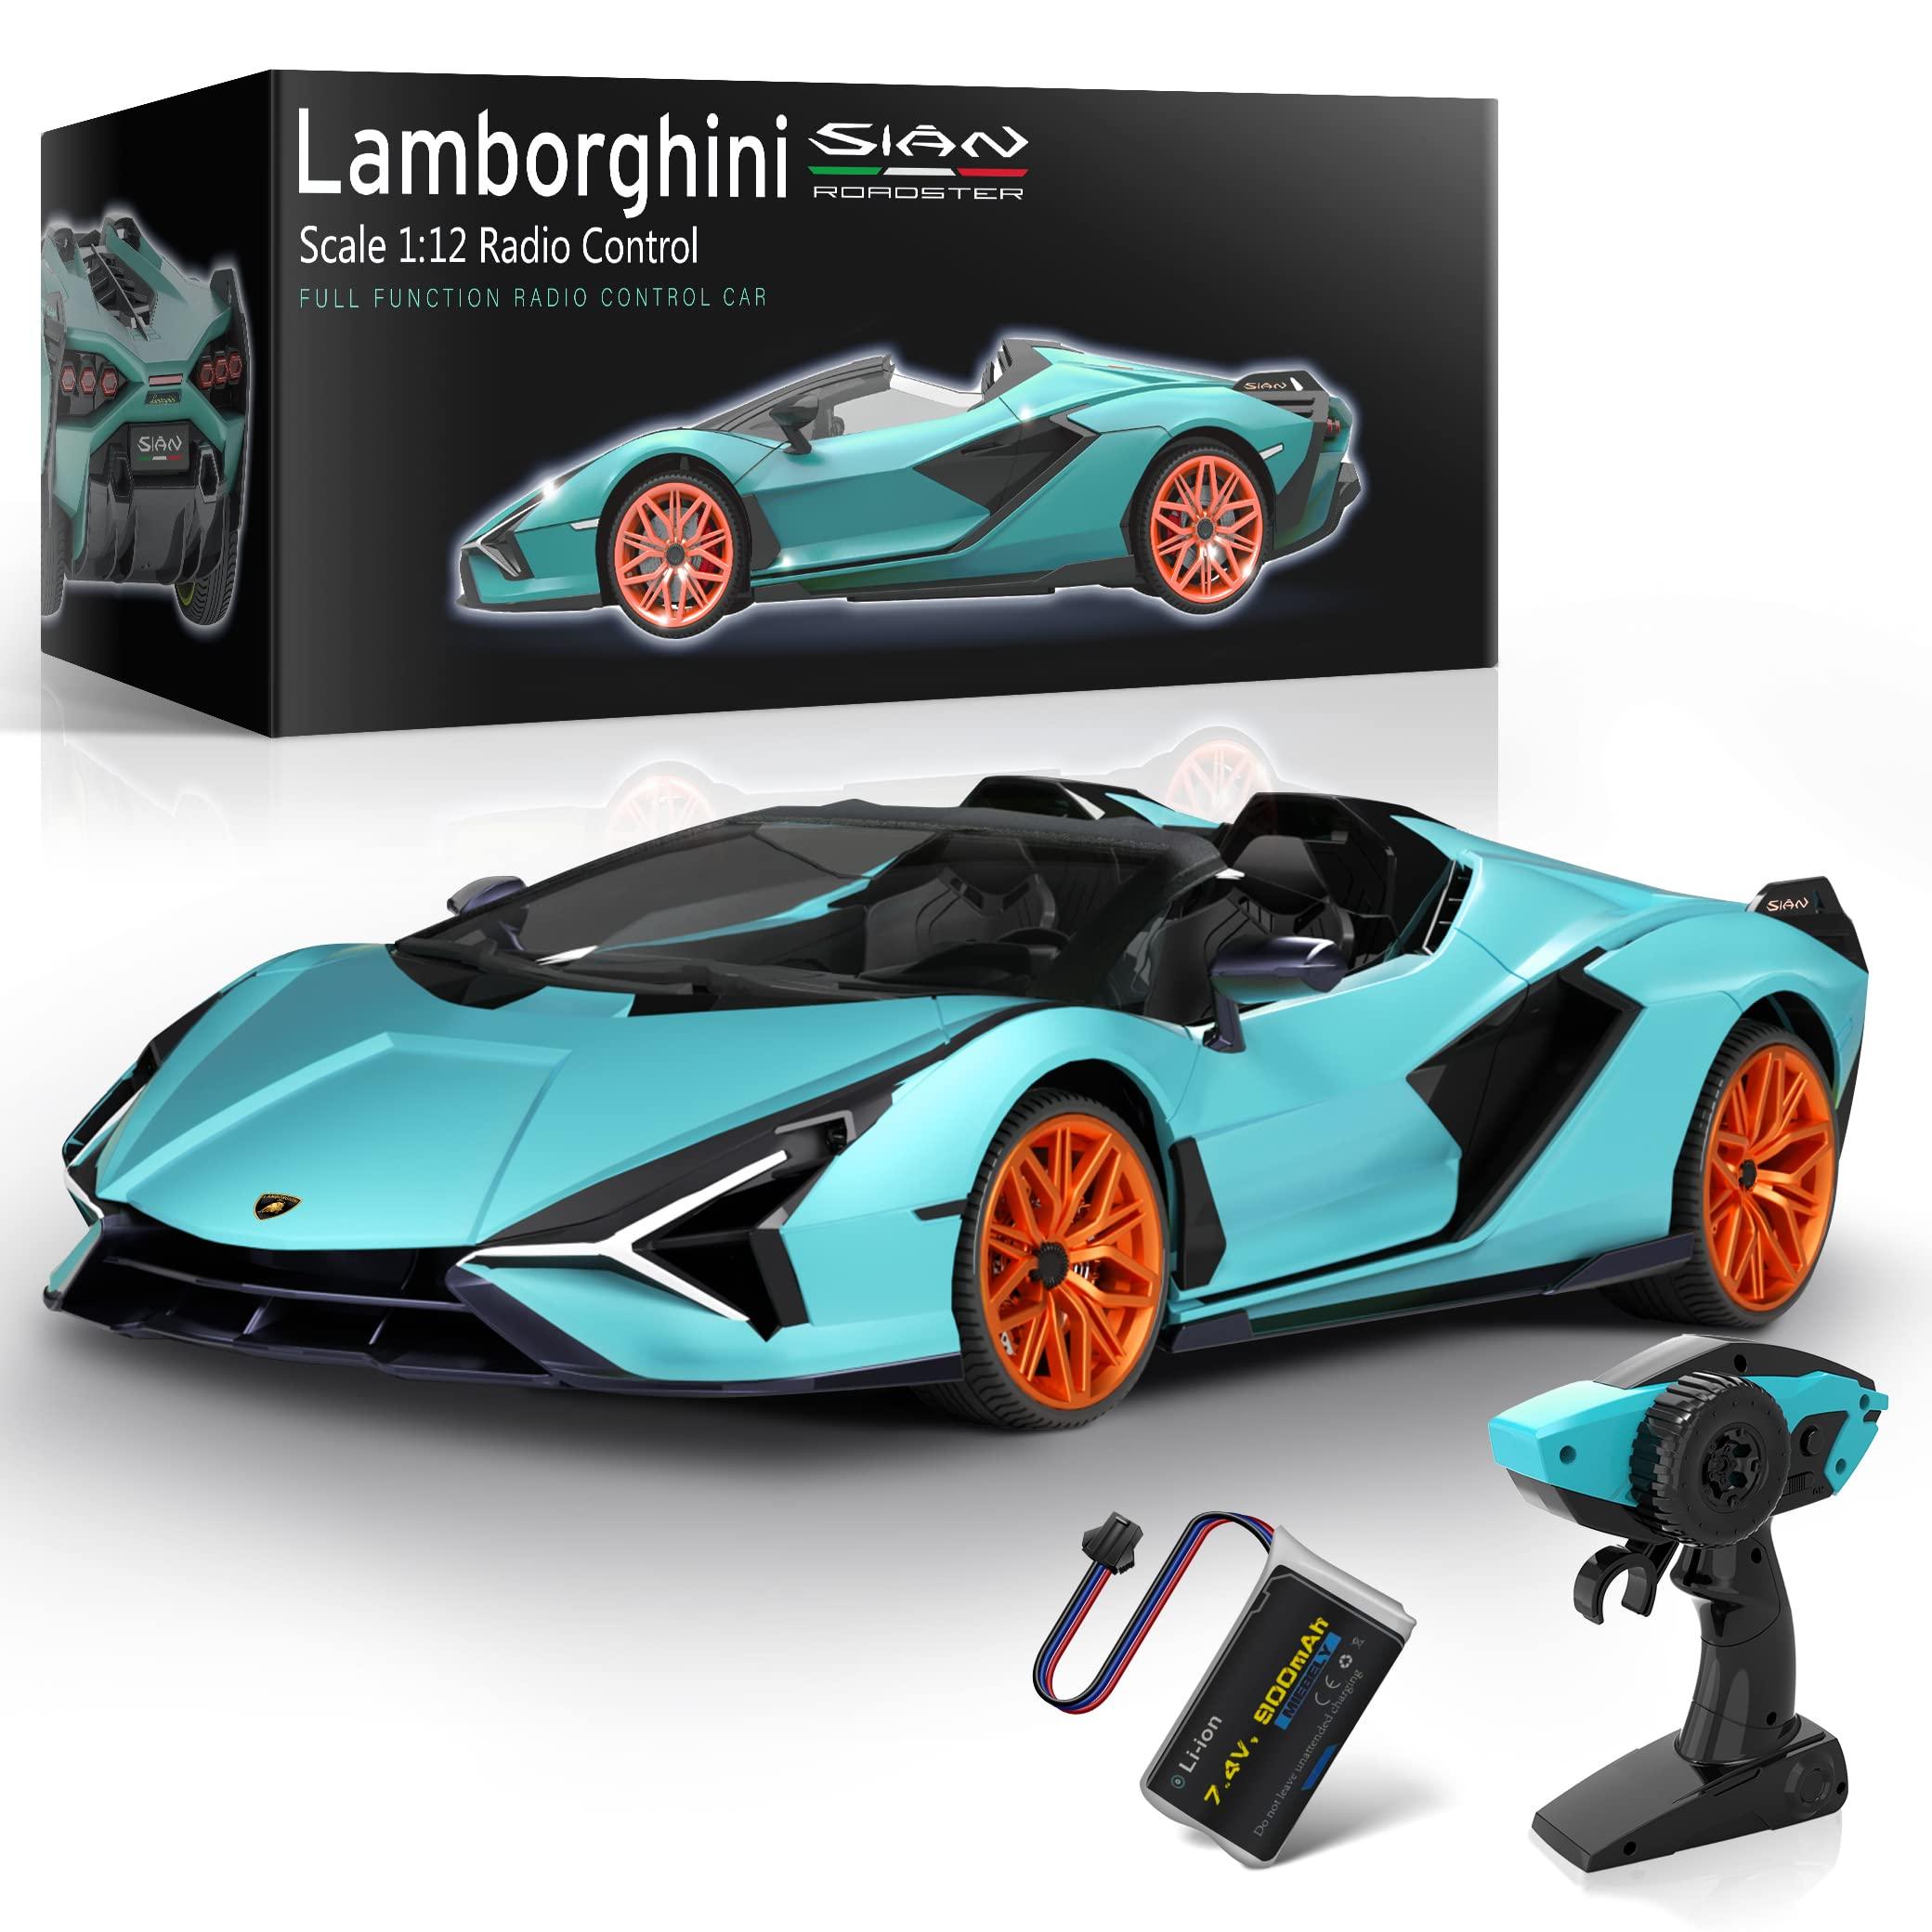 Rc 1/12: Finding the Right RC 1/12 Car for You